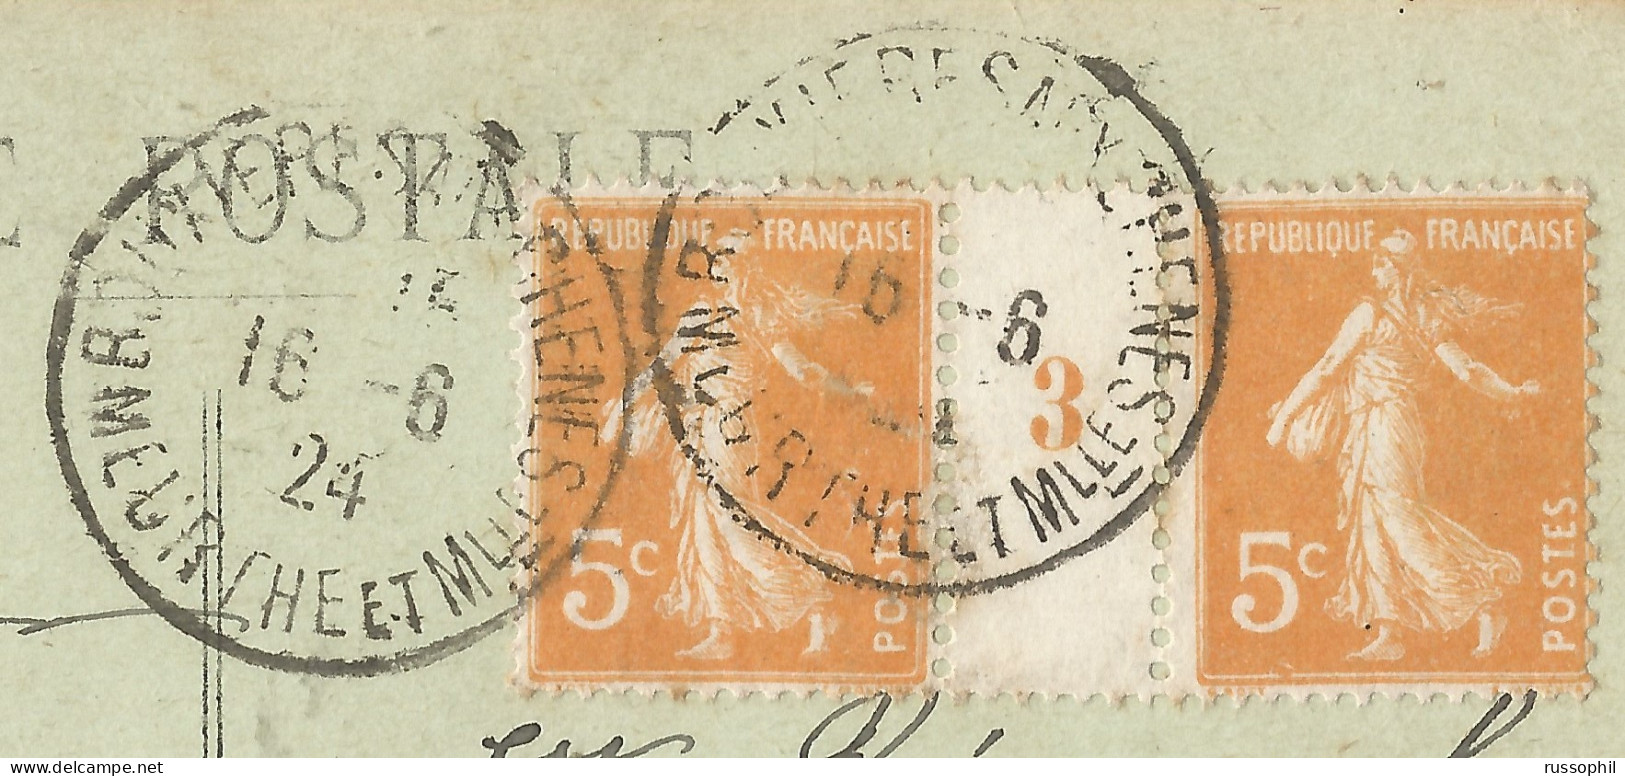 FRANCE -  MILLESIMES - PAIR Yv.  #158 MILLESIME 3 ALONE FRANKING PC FROM BOUXIERES AUX CHENES TO BAGNEUX - 1924 - Millesimes